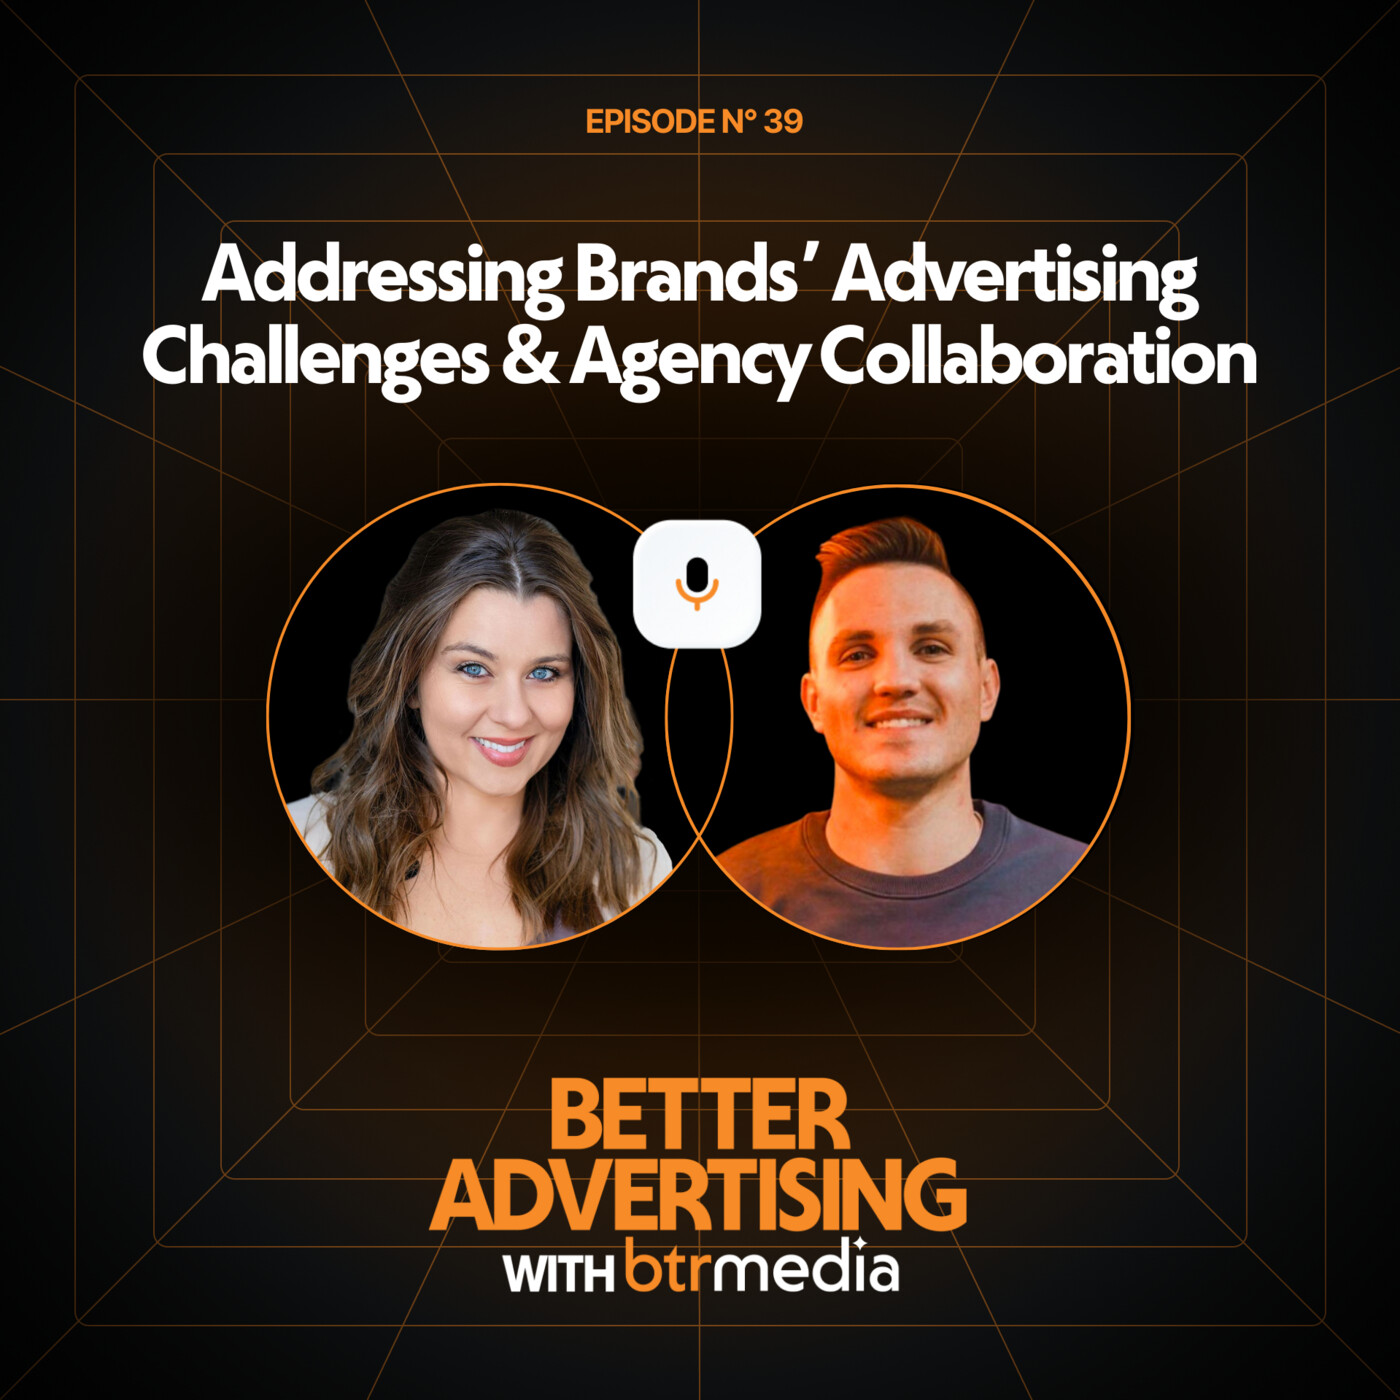 Addressing Brands' Advertising Challenges & Agency Collaboration